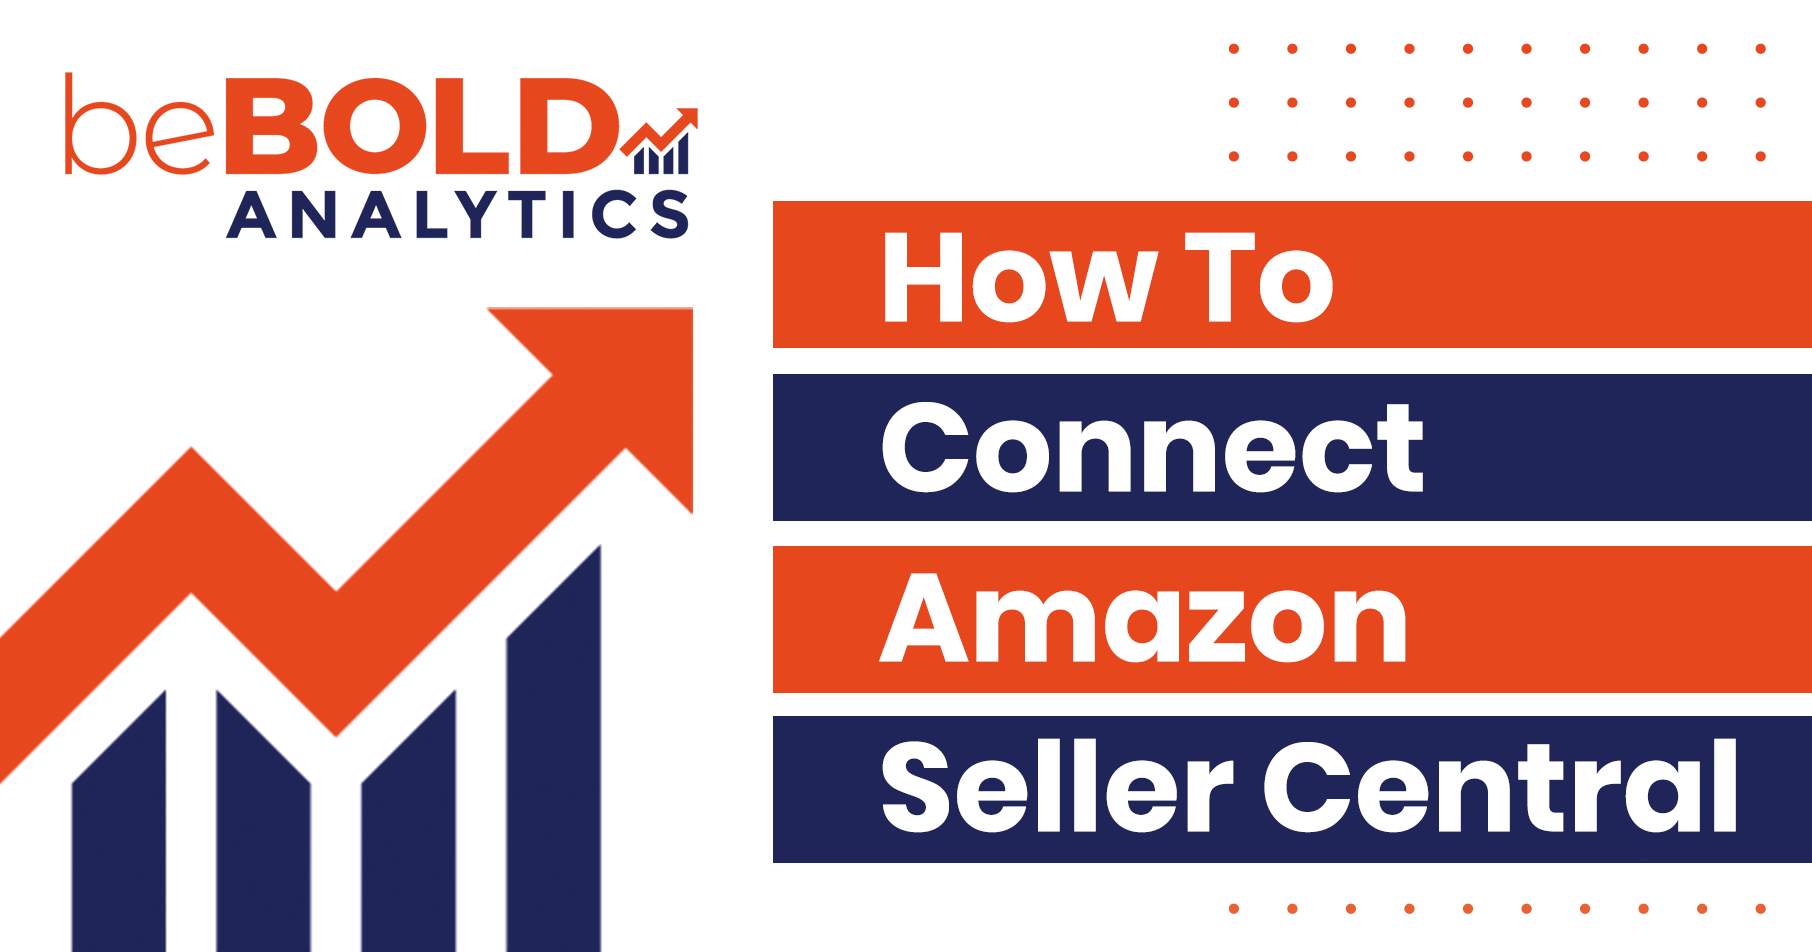 Connect Amazon Seller Central to beBOLD Analytics